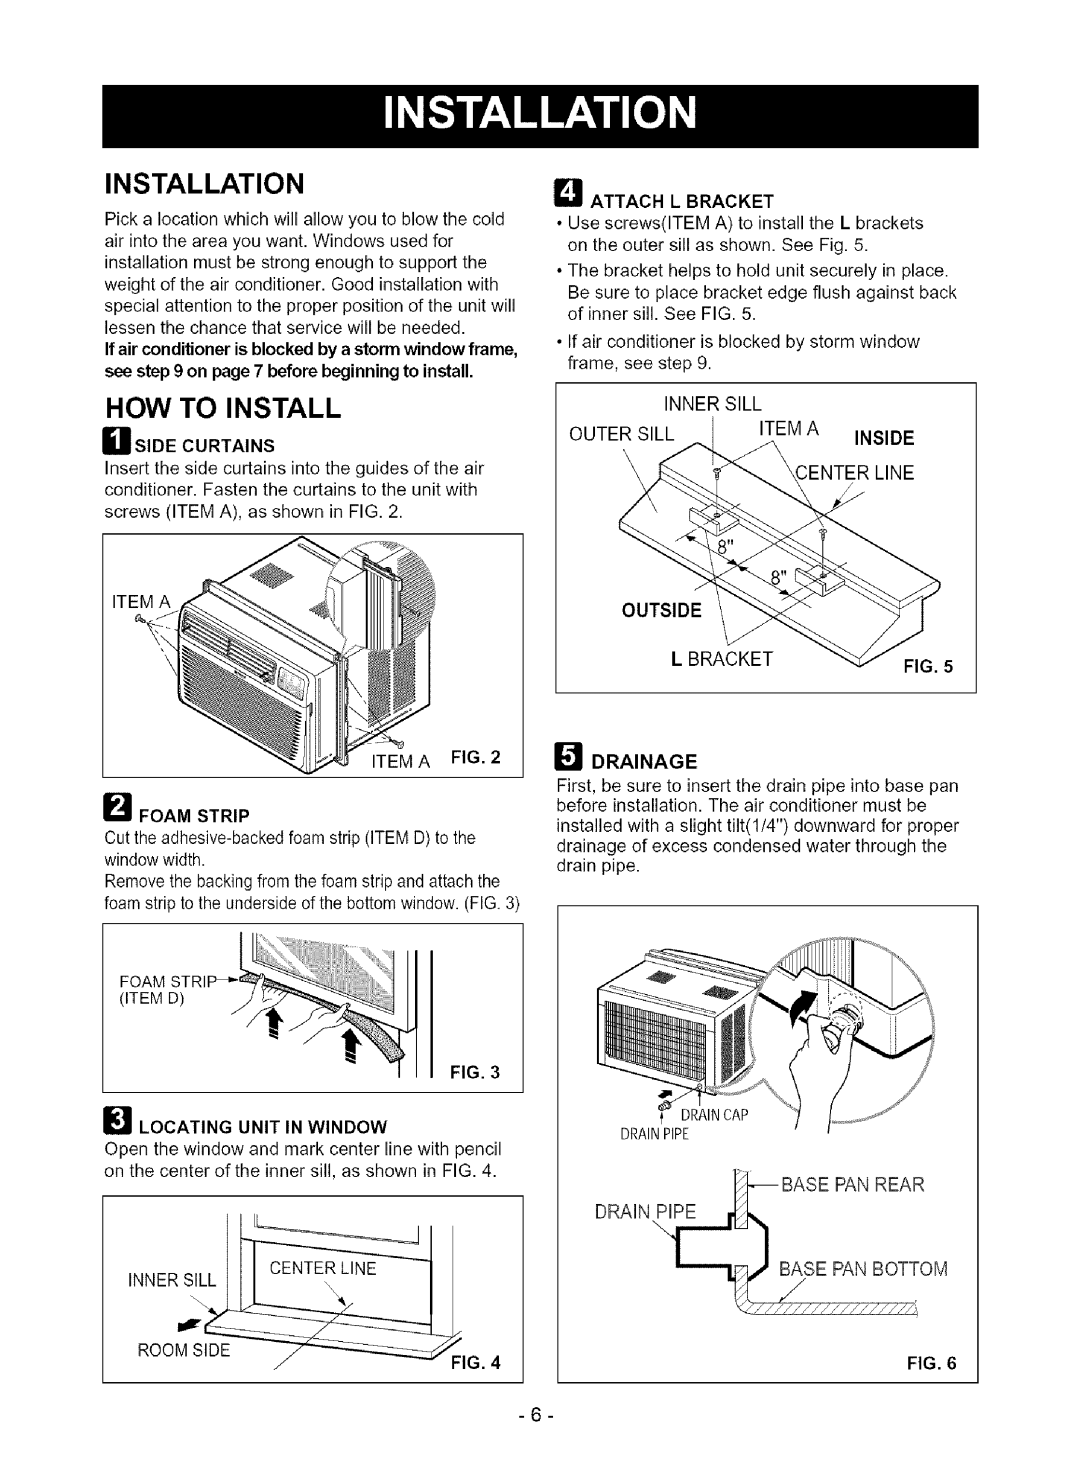 Kenmore 580.75080 owner manual Installation, How To Install, Drainage, Hside Curtains, Qattach L Bracket 